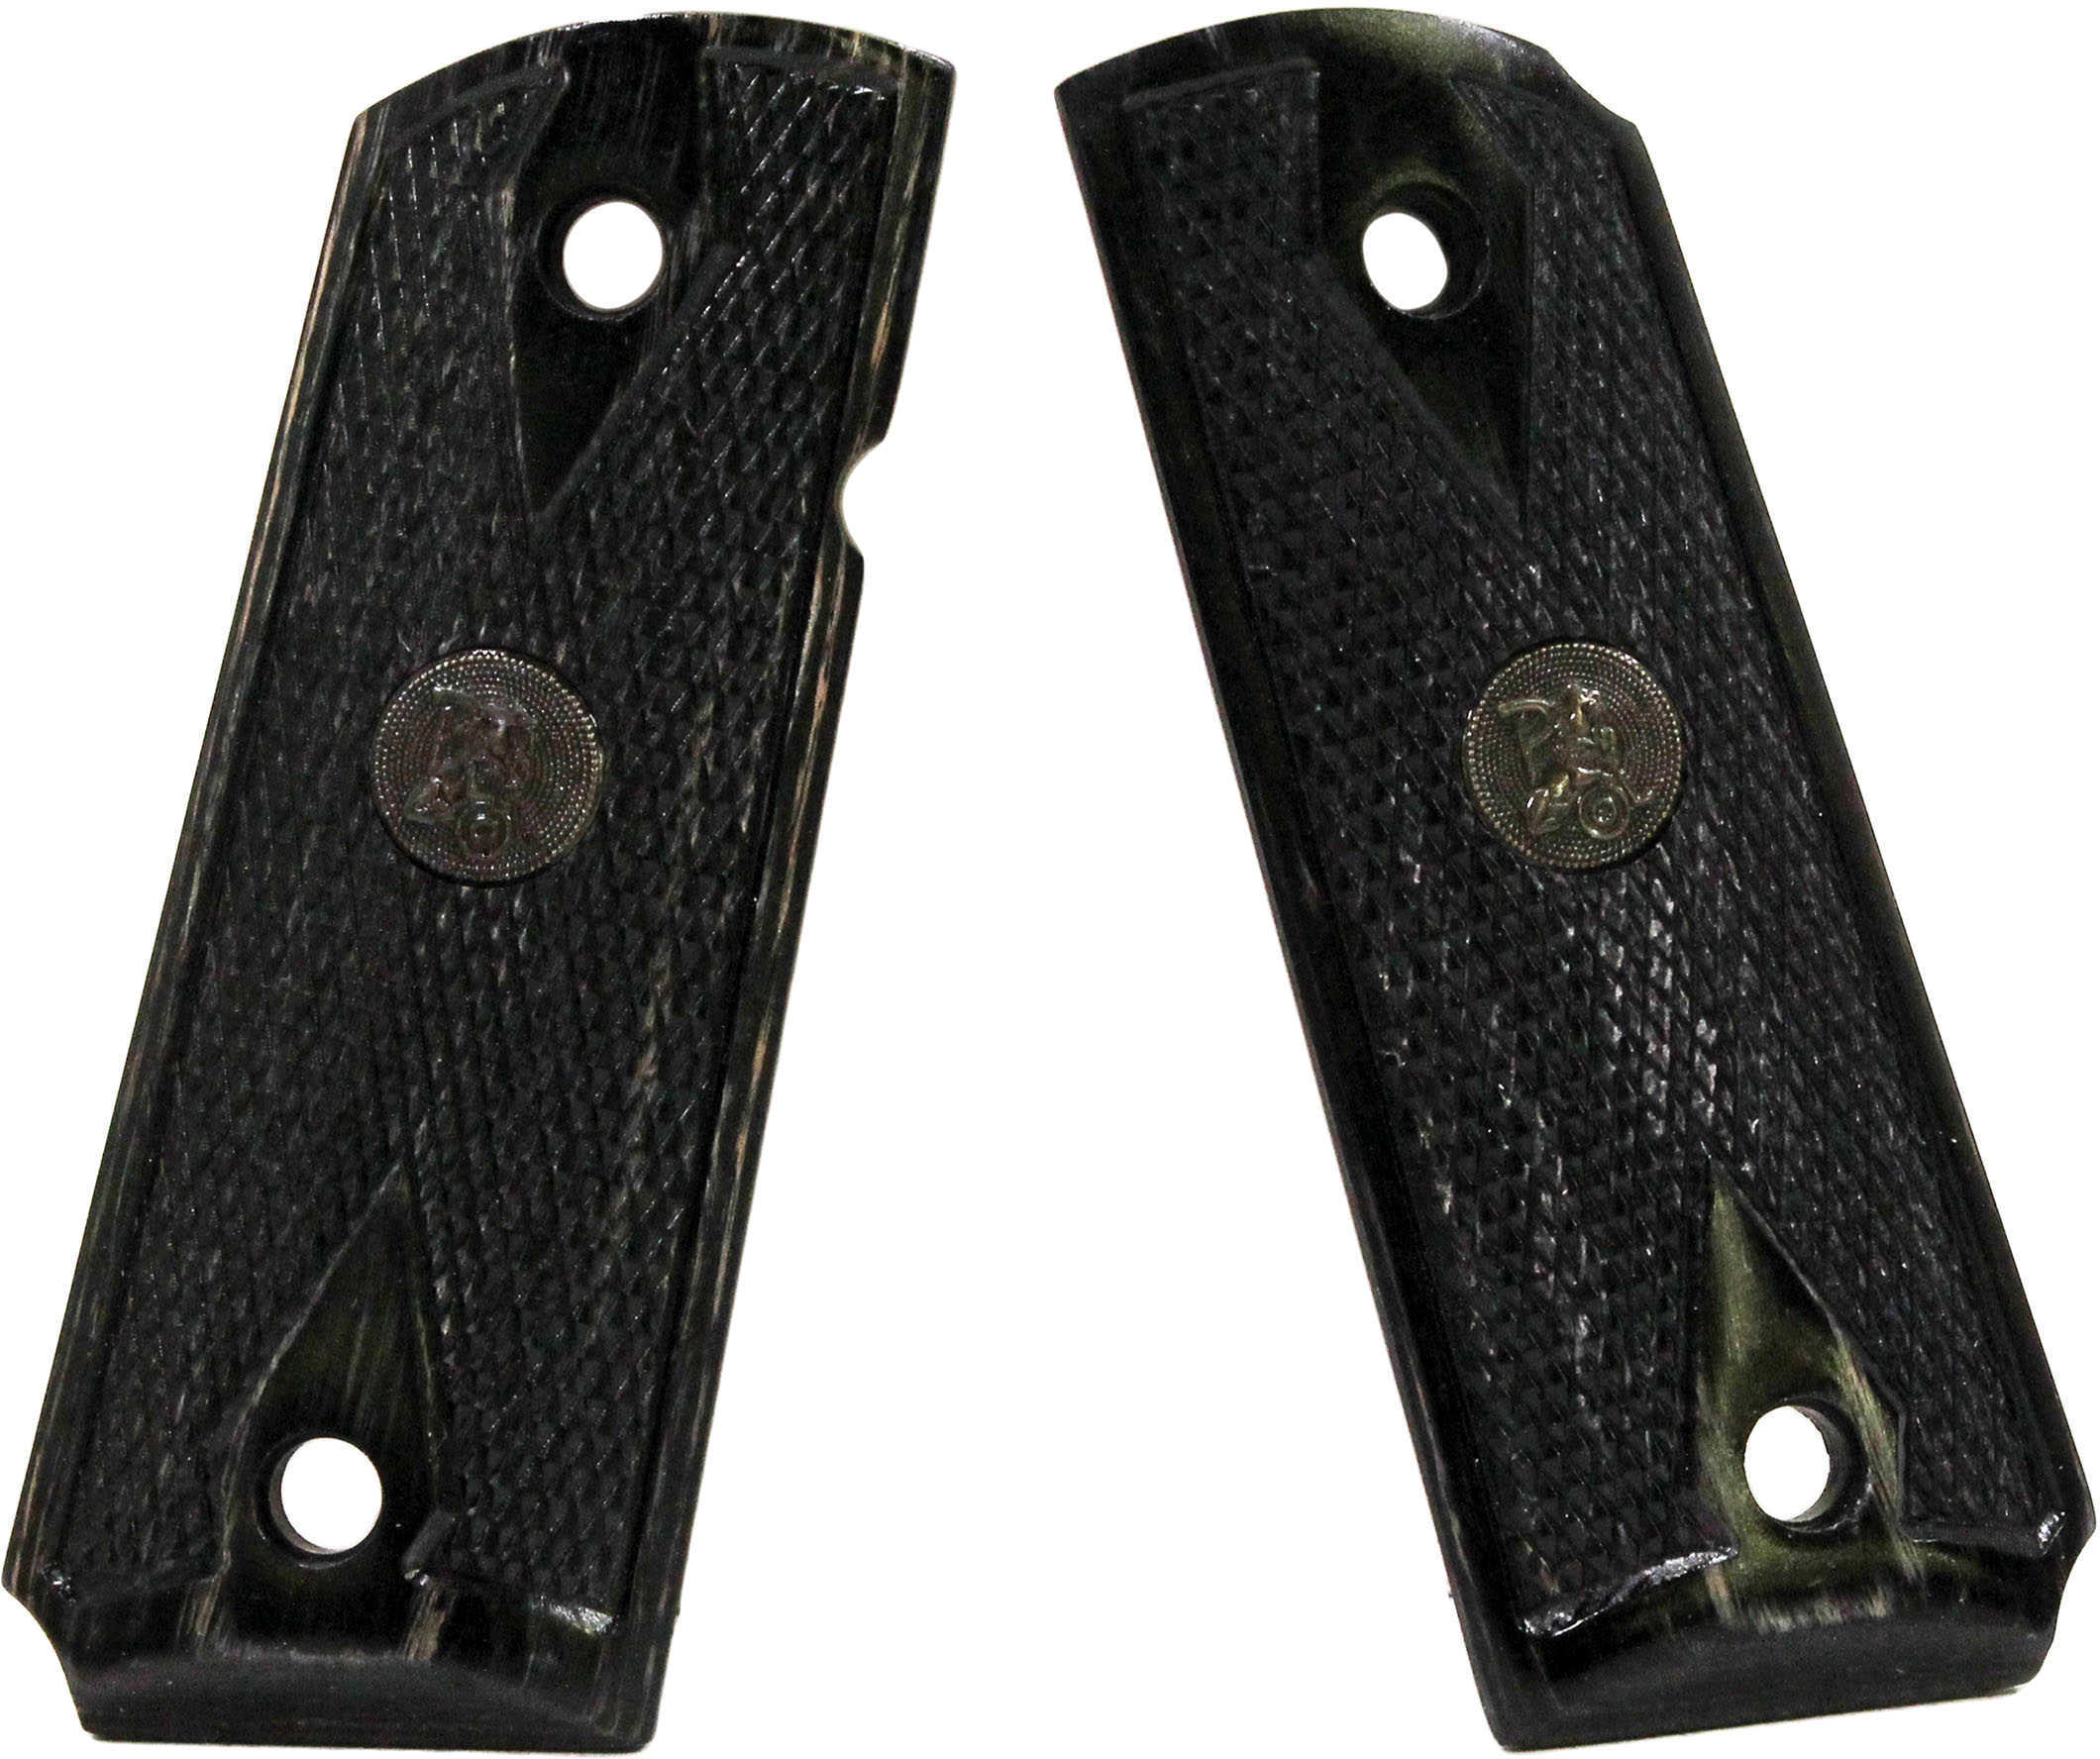 Pachmayr Renegade 1911 Officer Charcoal Double Diamond 63251